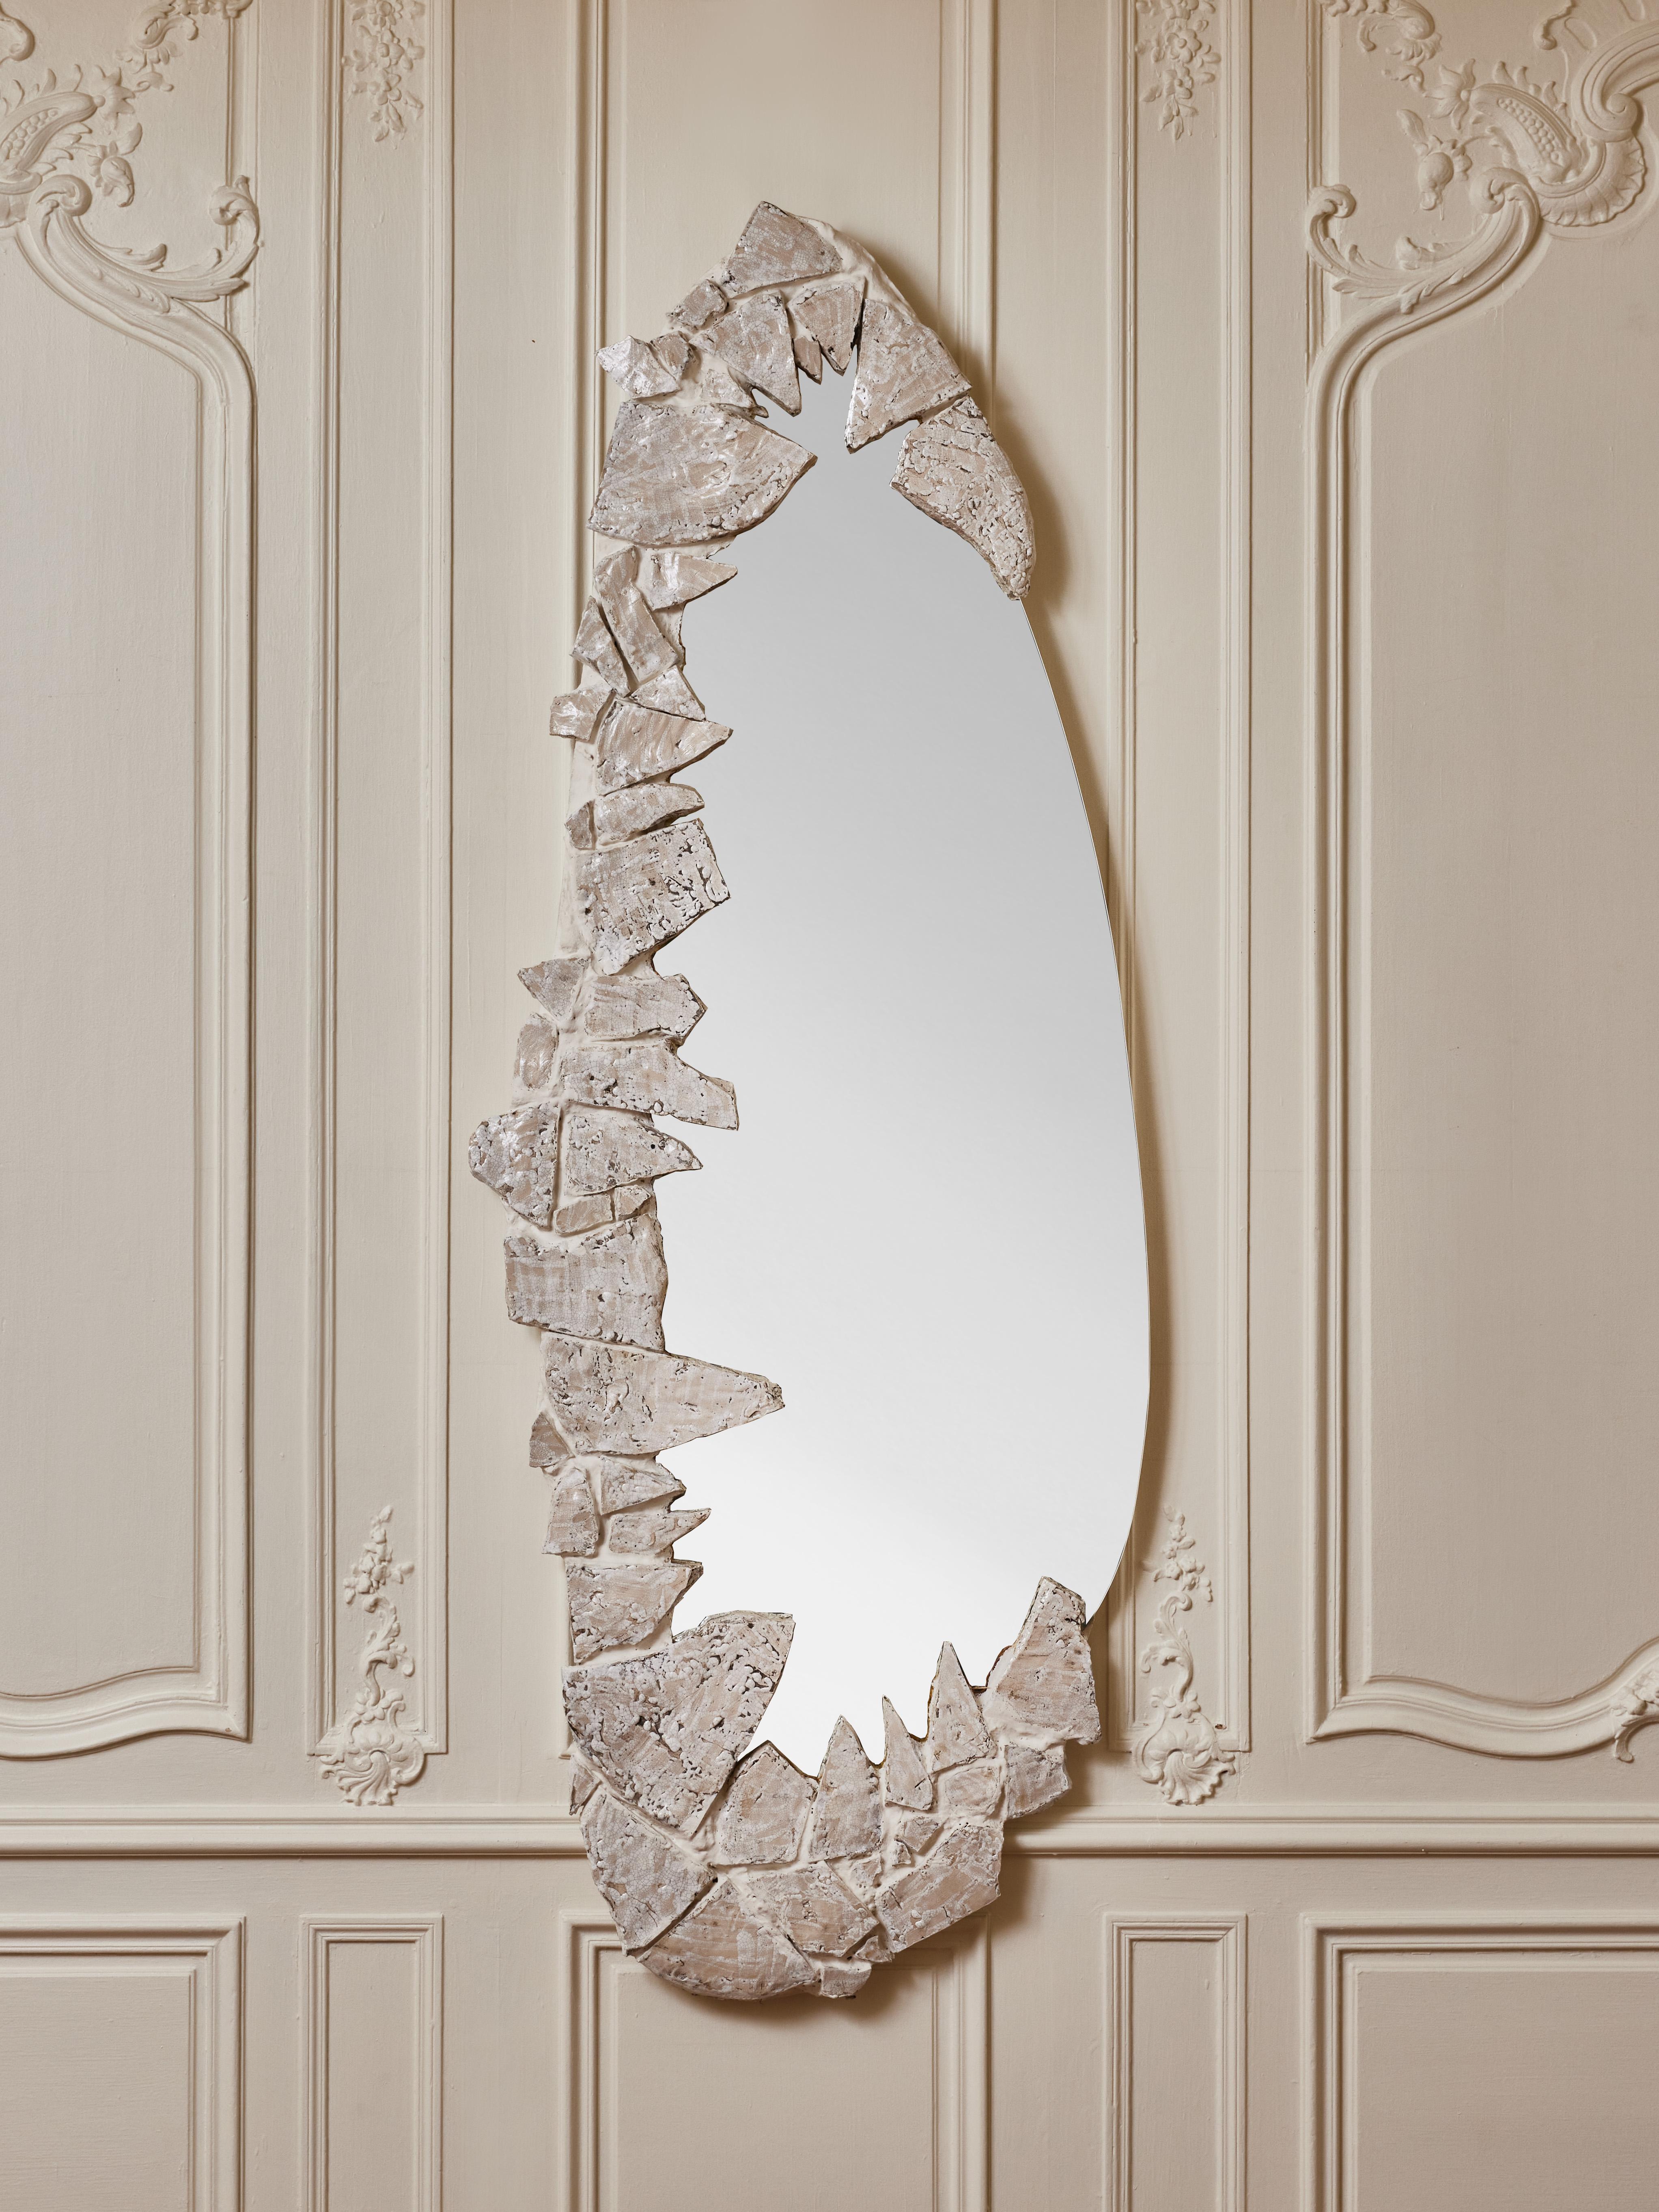 Oval mirror with frame in sculpted ceramic.
Signed piece by the artist Léo Nataf for the Galerie Glustin.
France, 2022.